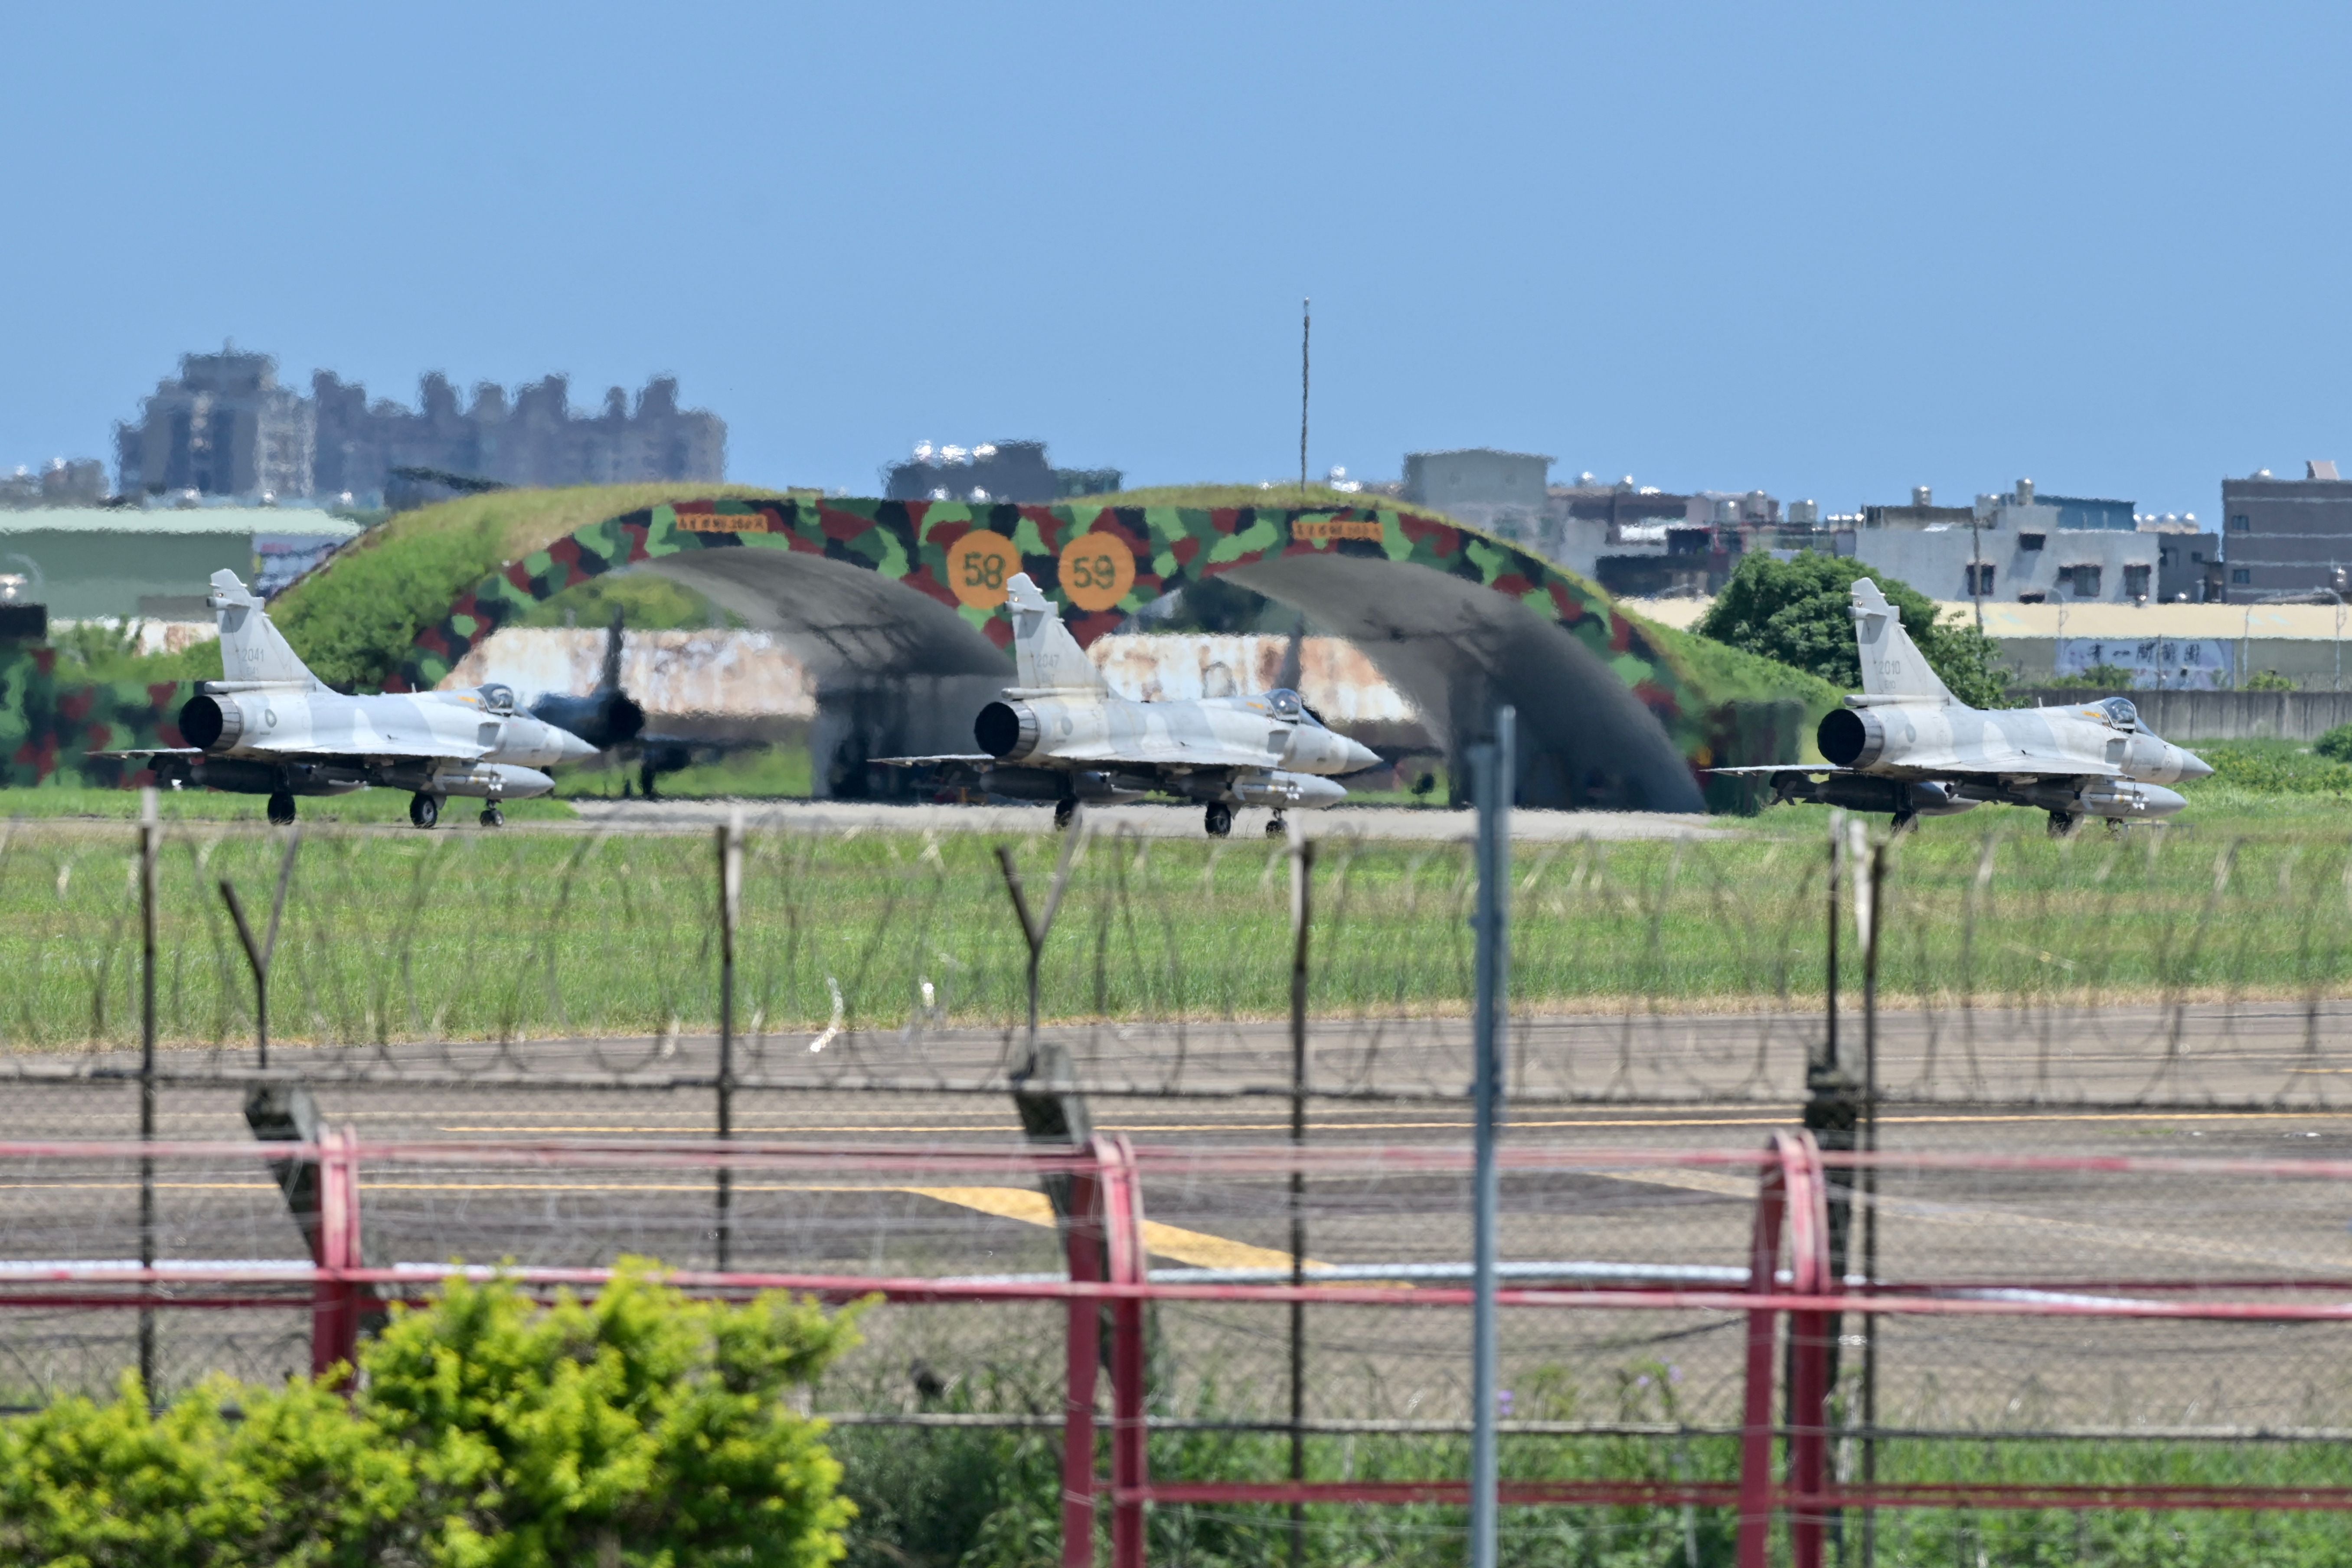 Three French-made Mirage 2000 fighter jets taxi on a runway in front of a hangar at the Hsinchu Air Base in Hsinchu on 5 August 2022